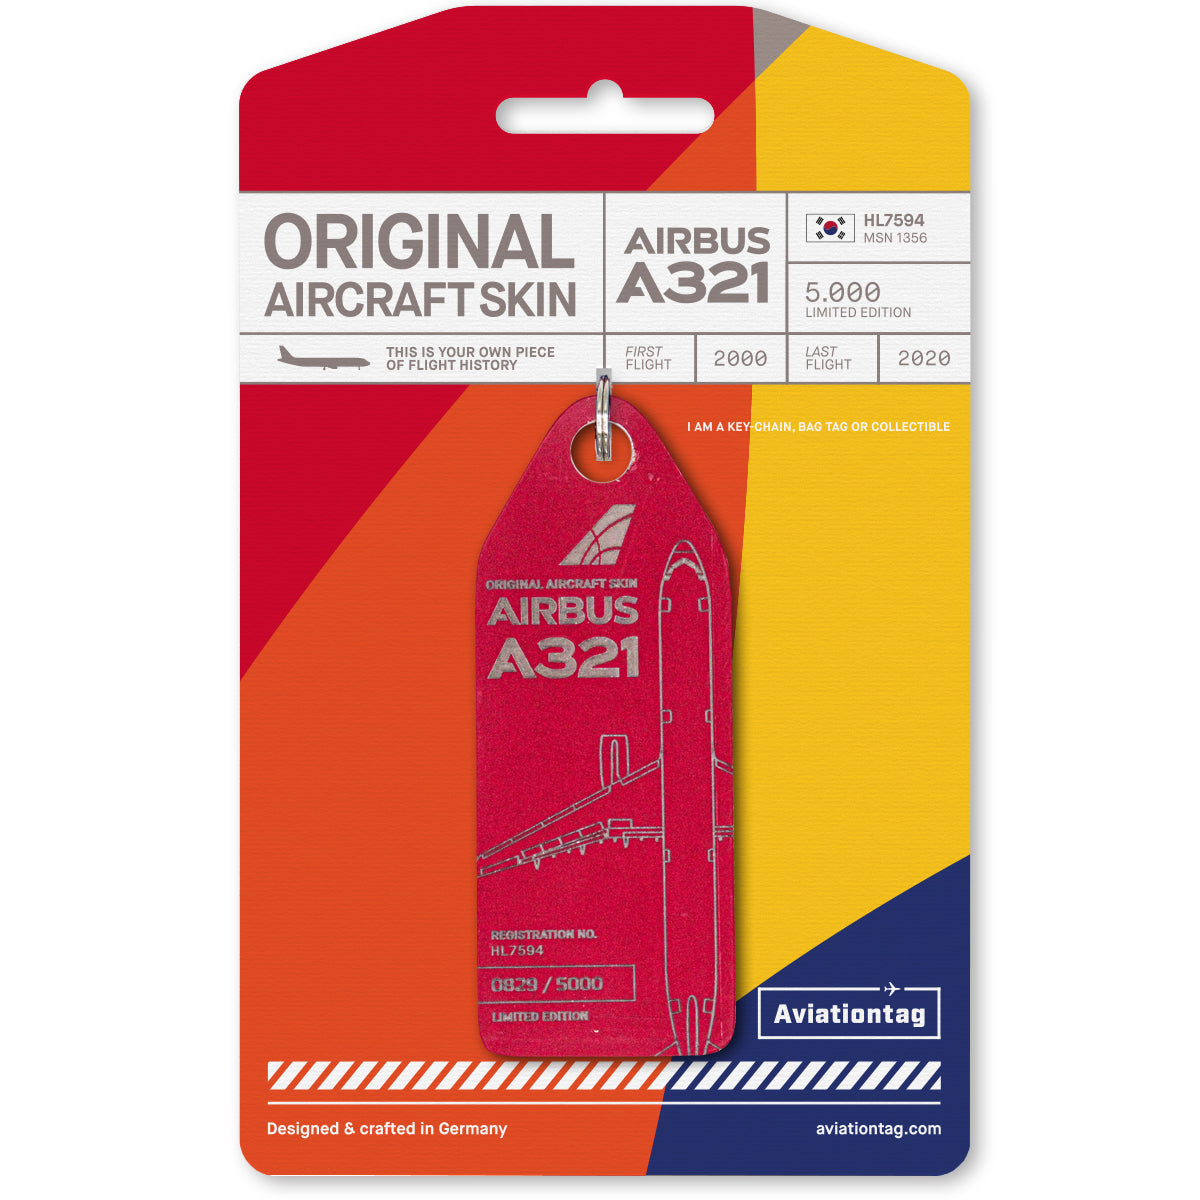 Aviationtag Airbus A321 Asiana HL7594 Edition Ruby red